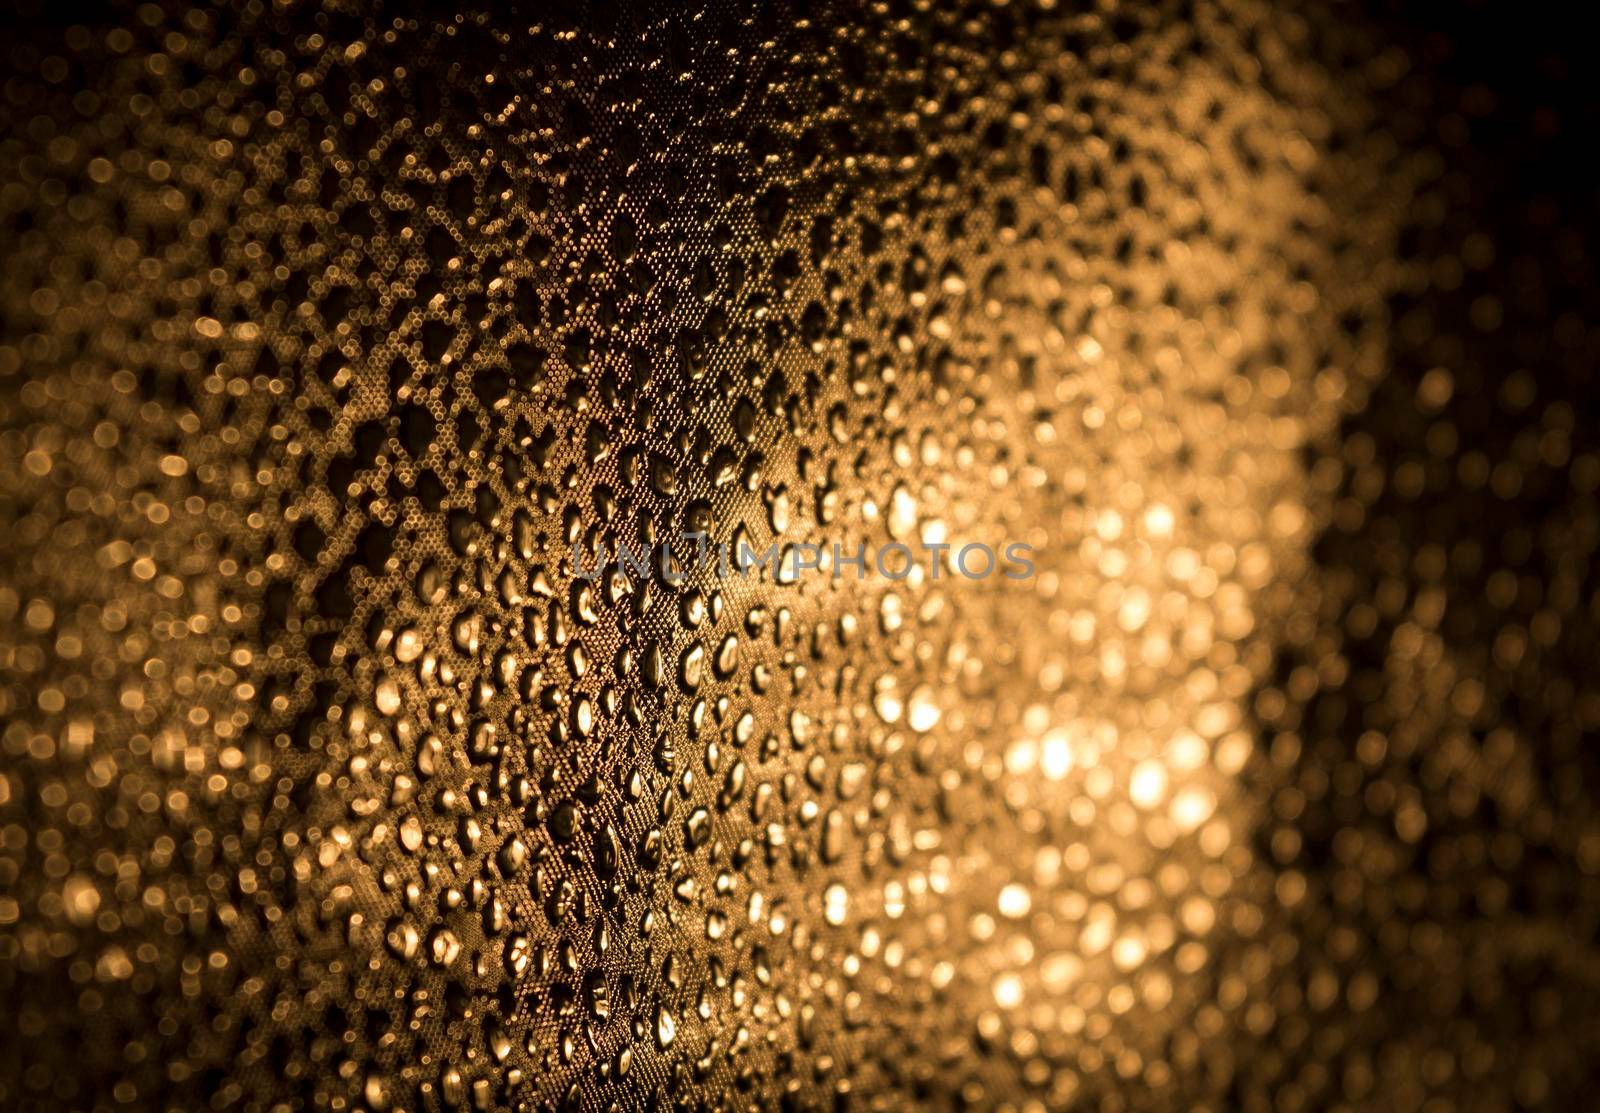 Abstract golden blurred background